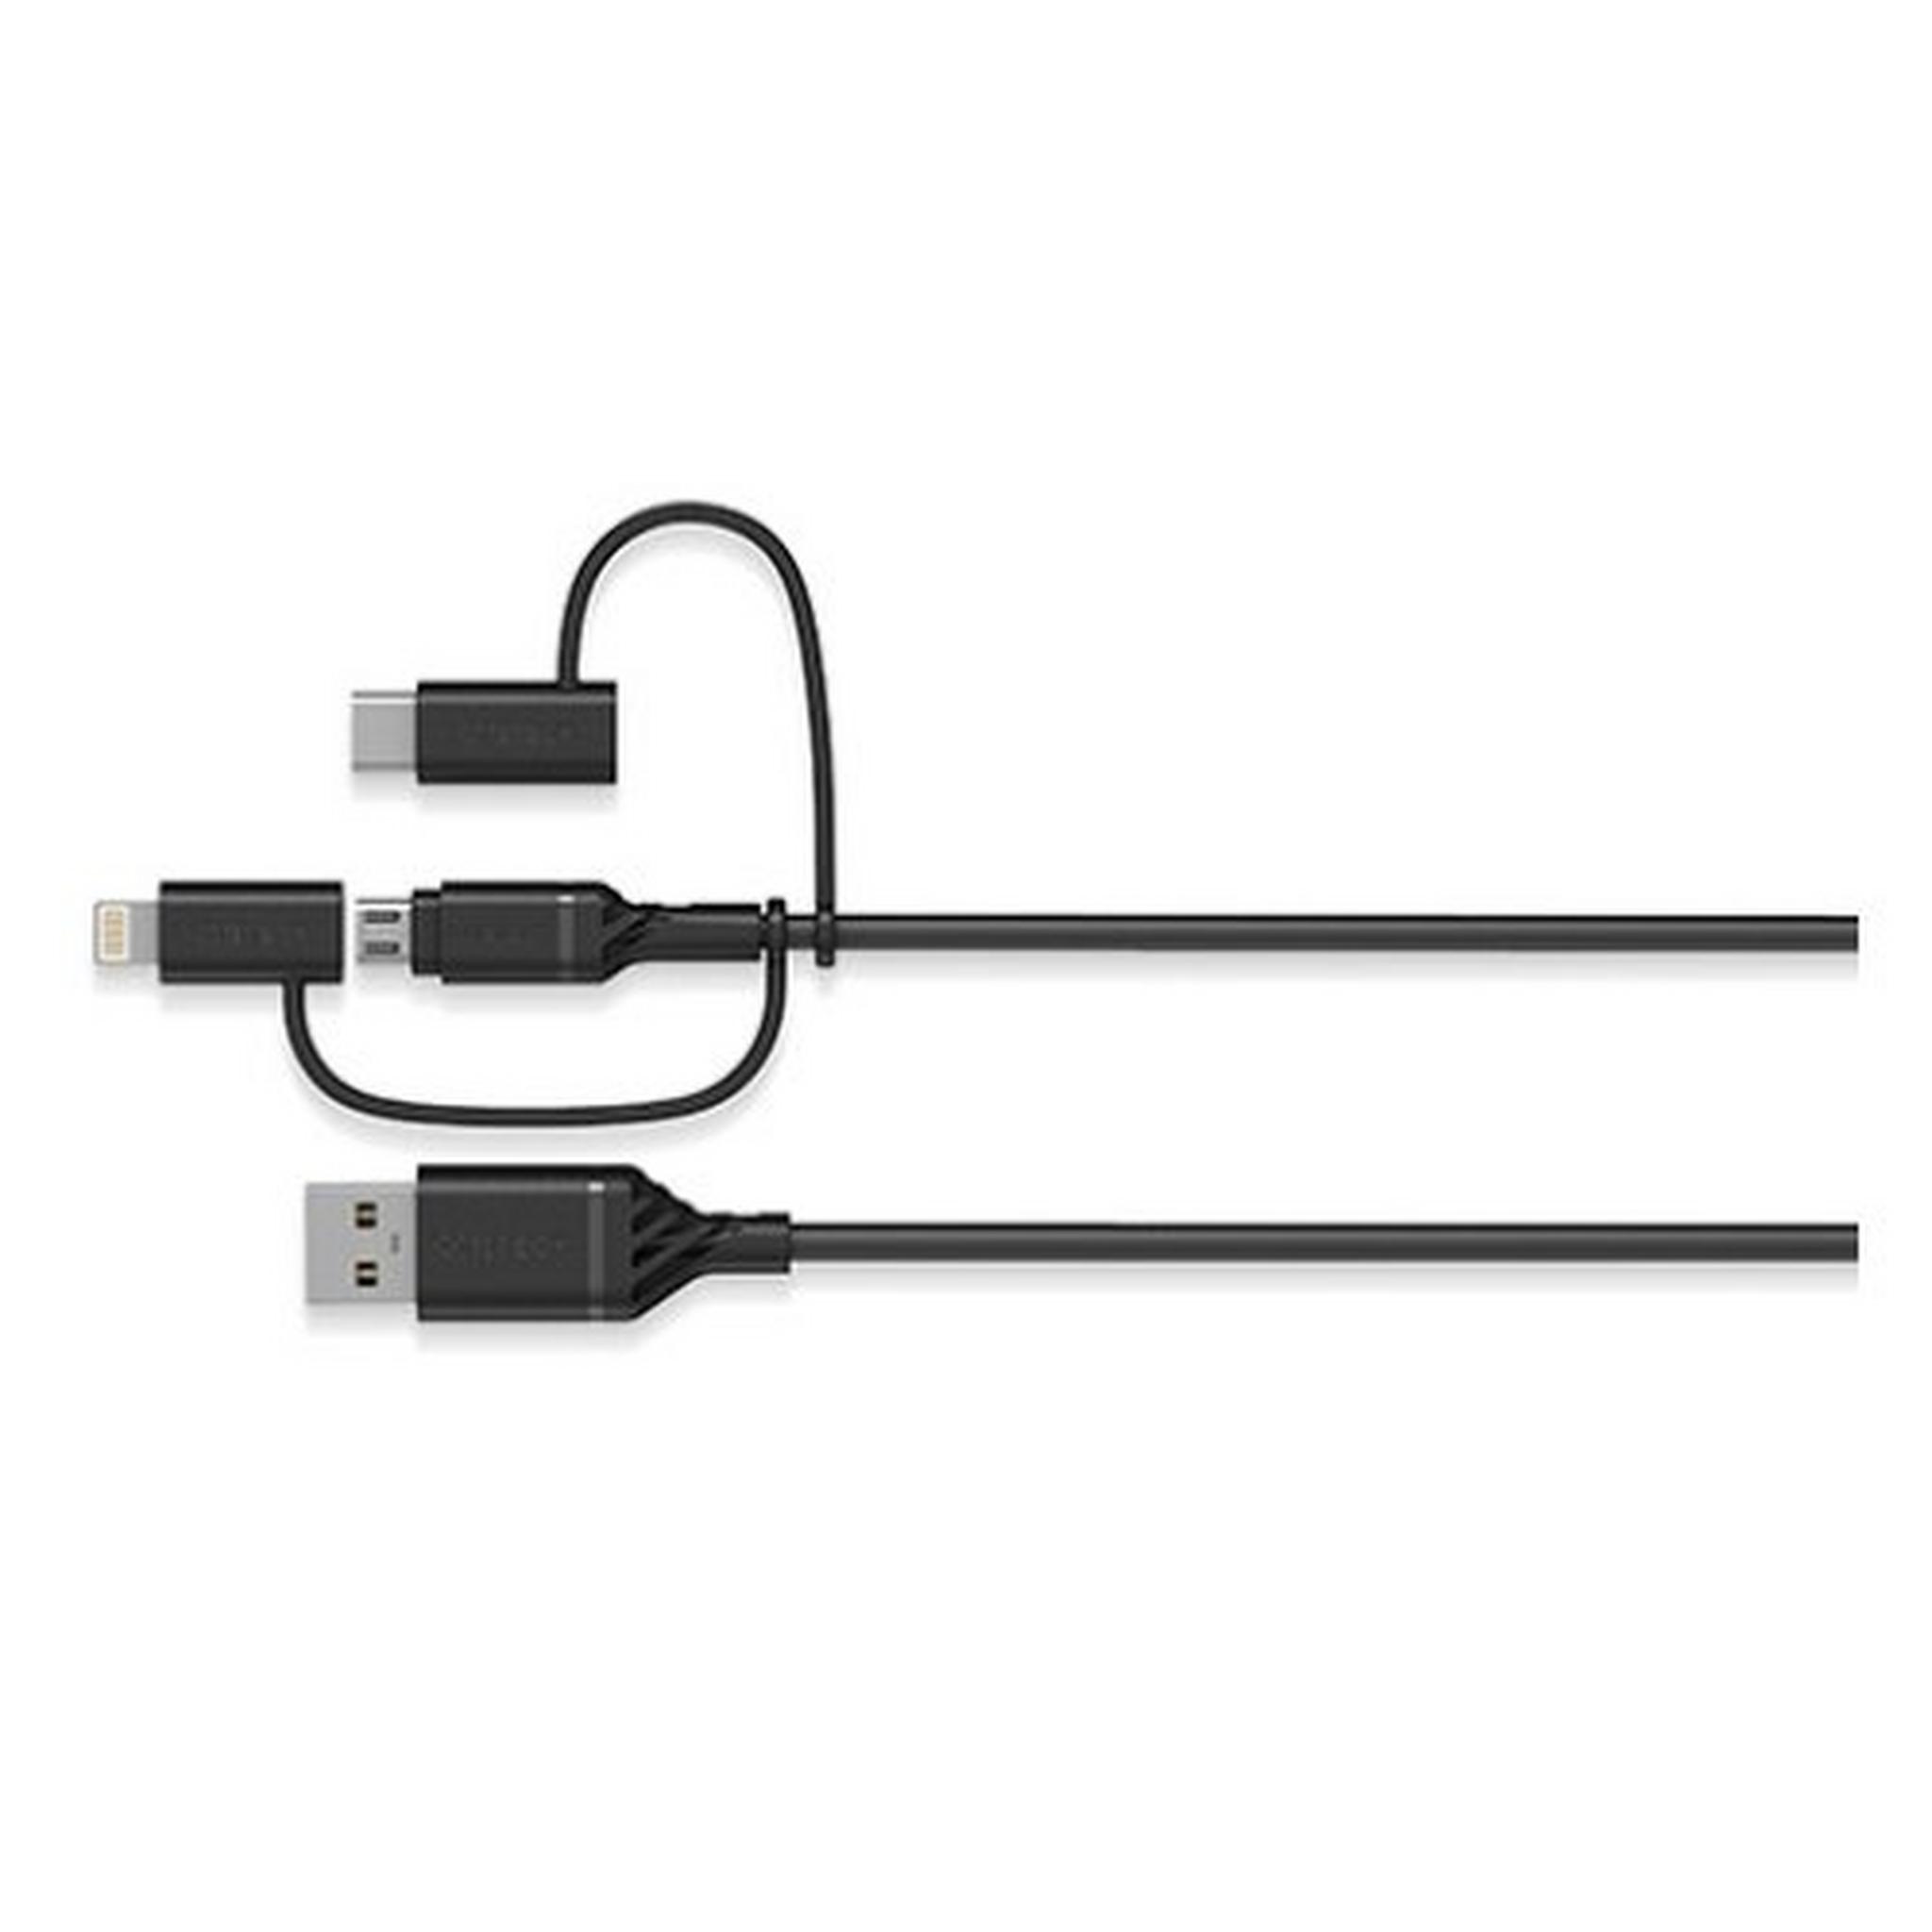 OtterBox 3 in 1 USB-A to Micro/Lightning/USB-C Cable - Black